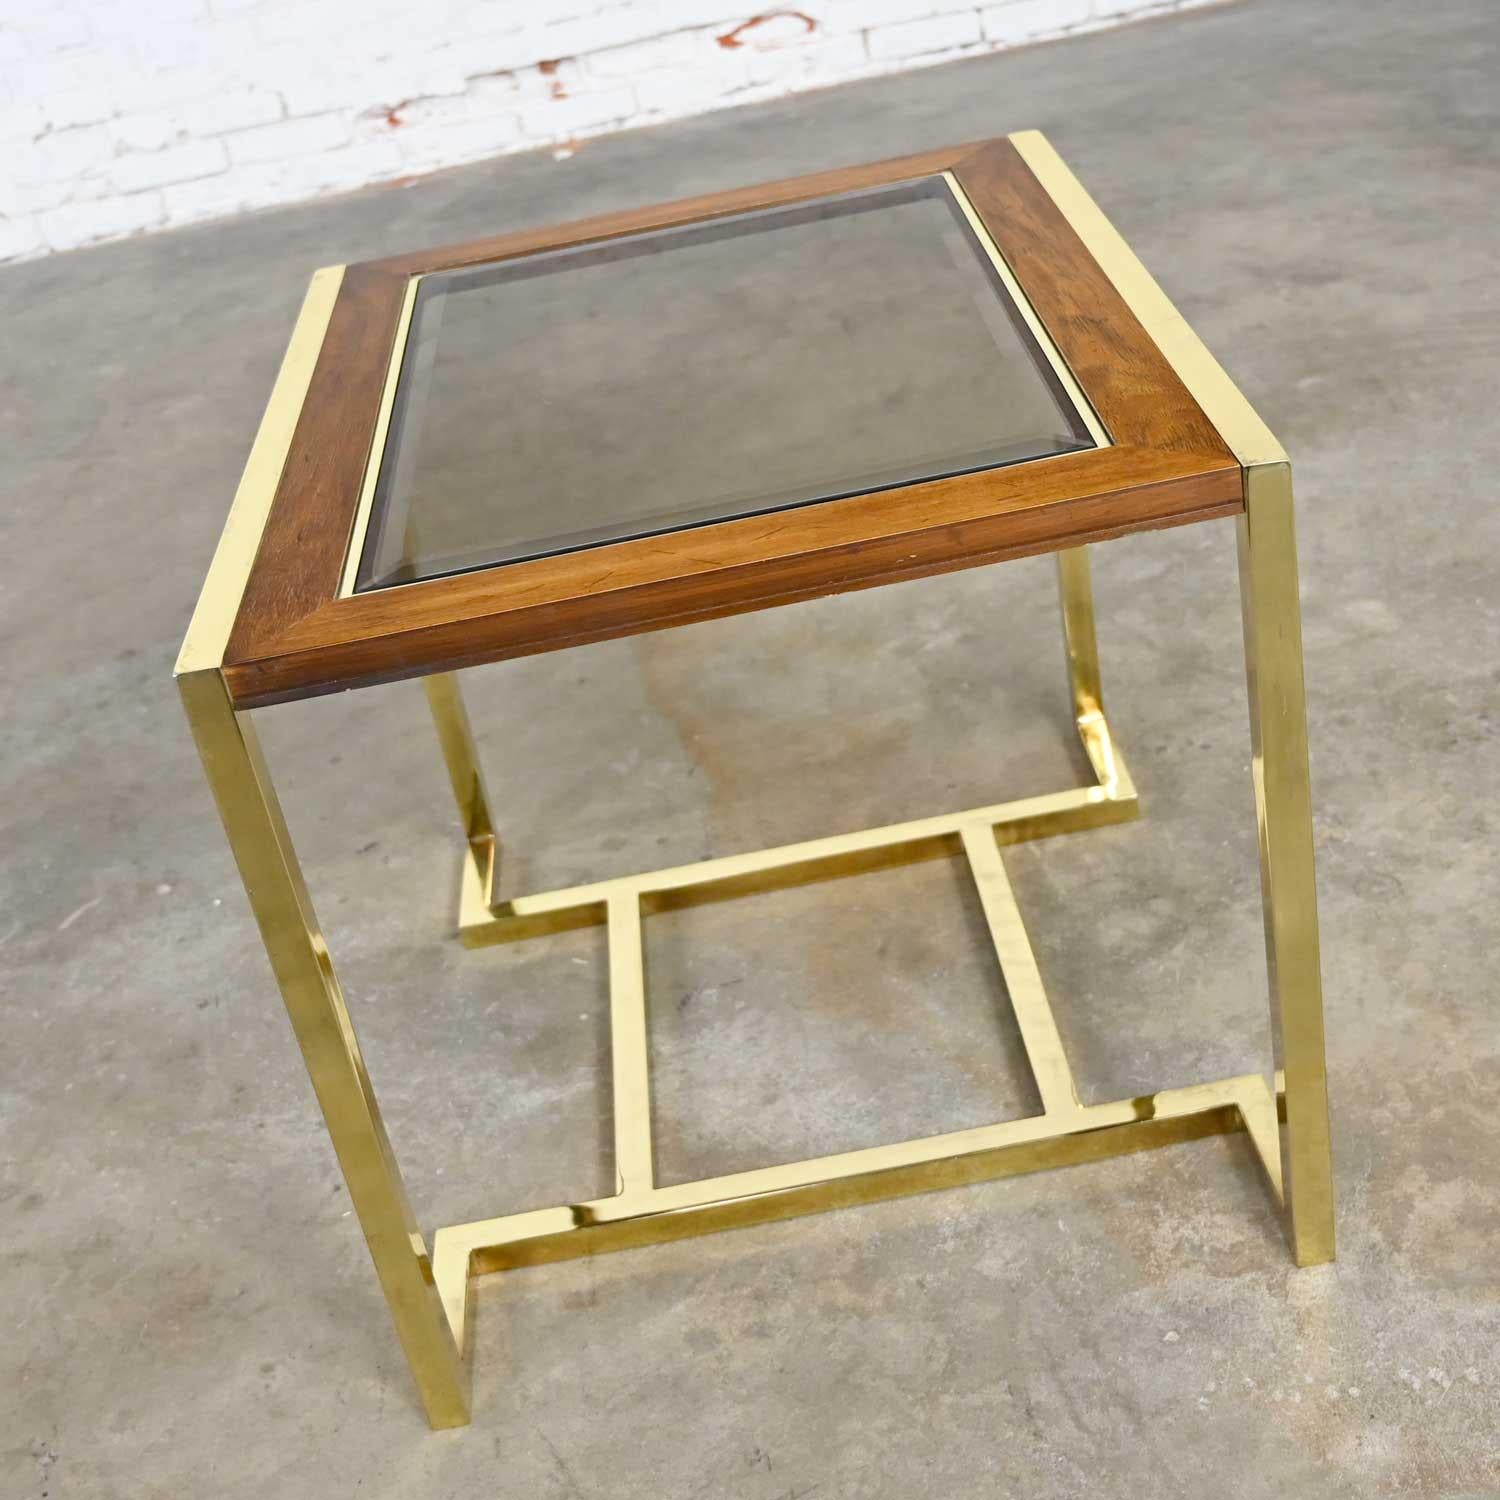 Handsome modern rectangle end table comprised of a polished brass plate frame with a top of dark wood and beveled smoked glass insert, by Thomasville Furniture Ind., in the style of Milo Baughman. Beautiful condition overall. The finish on the wood